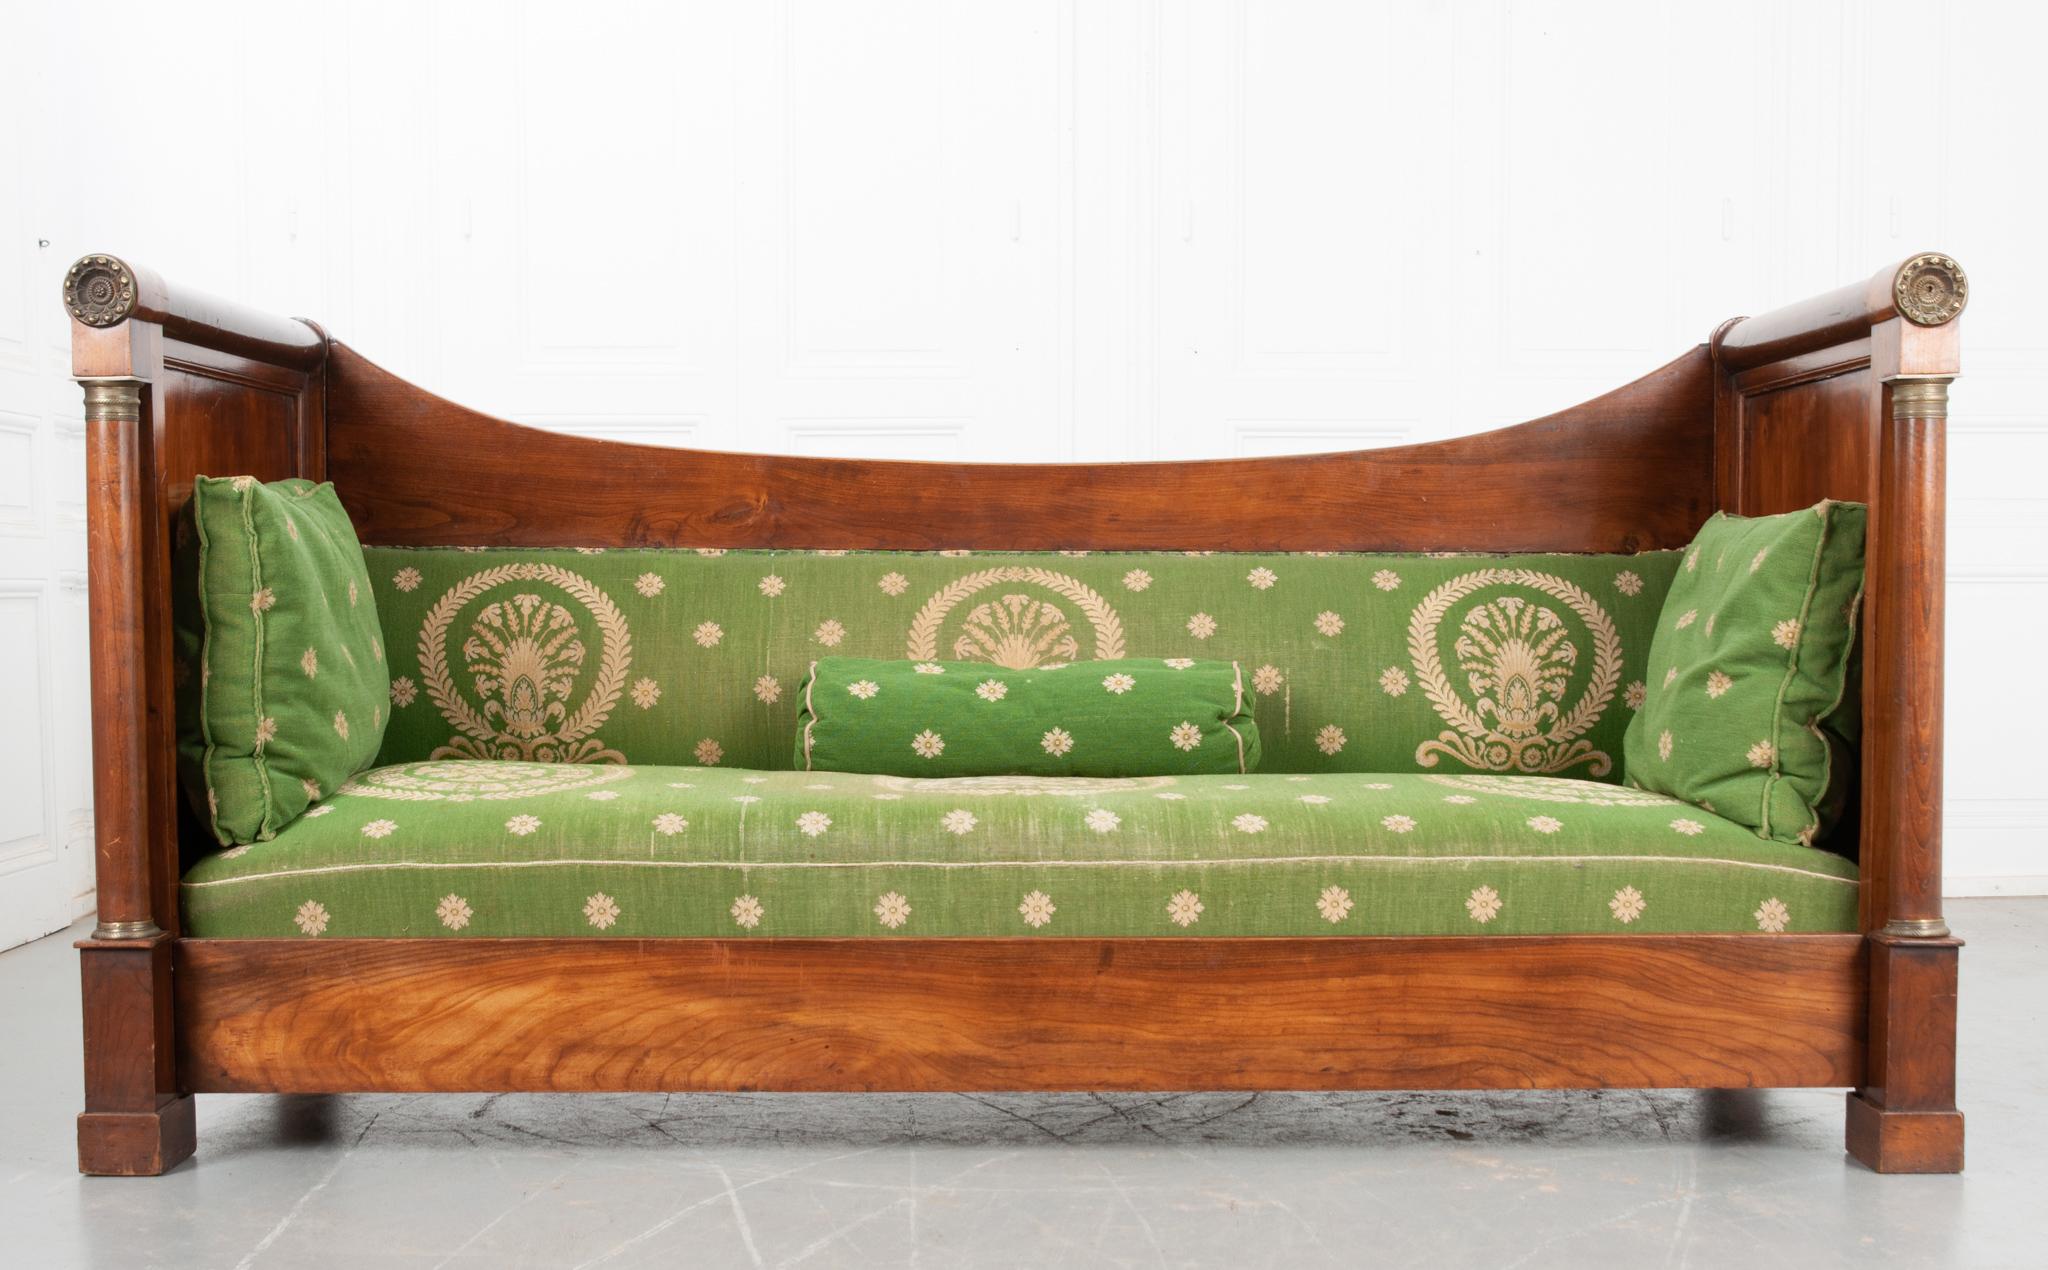 This handsome Empire style sofa is made of walnut from 19th Century France. The decorative laurel wreath and floral green upholstery is lovely against the bright wood frame. The fabric is slightly worn as one would expect with over two centuries of